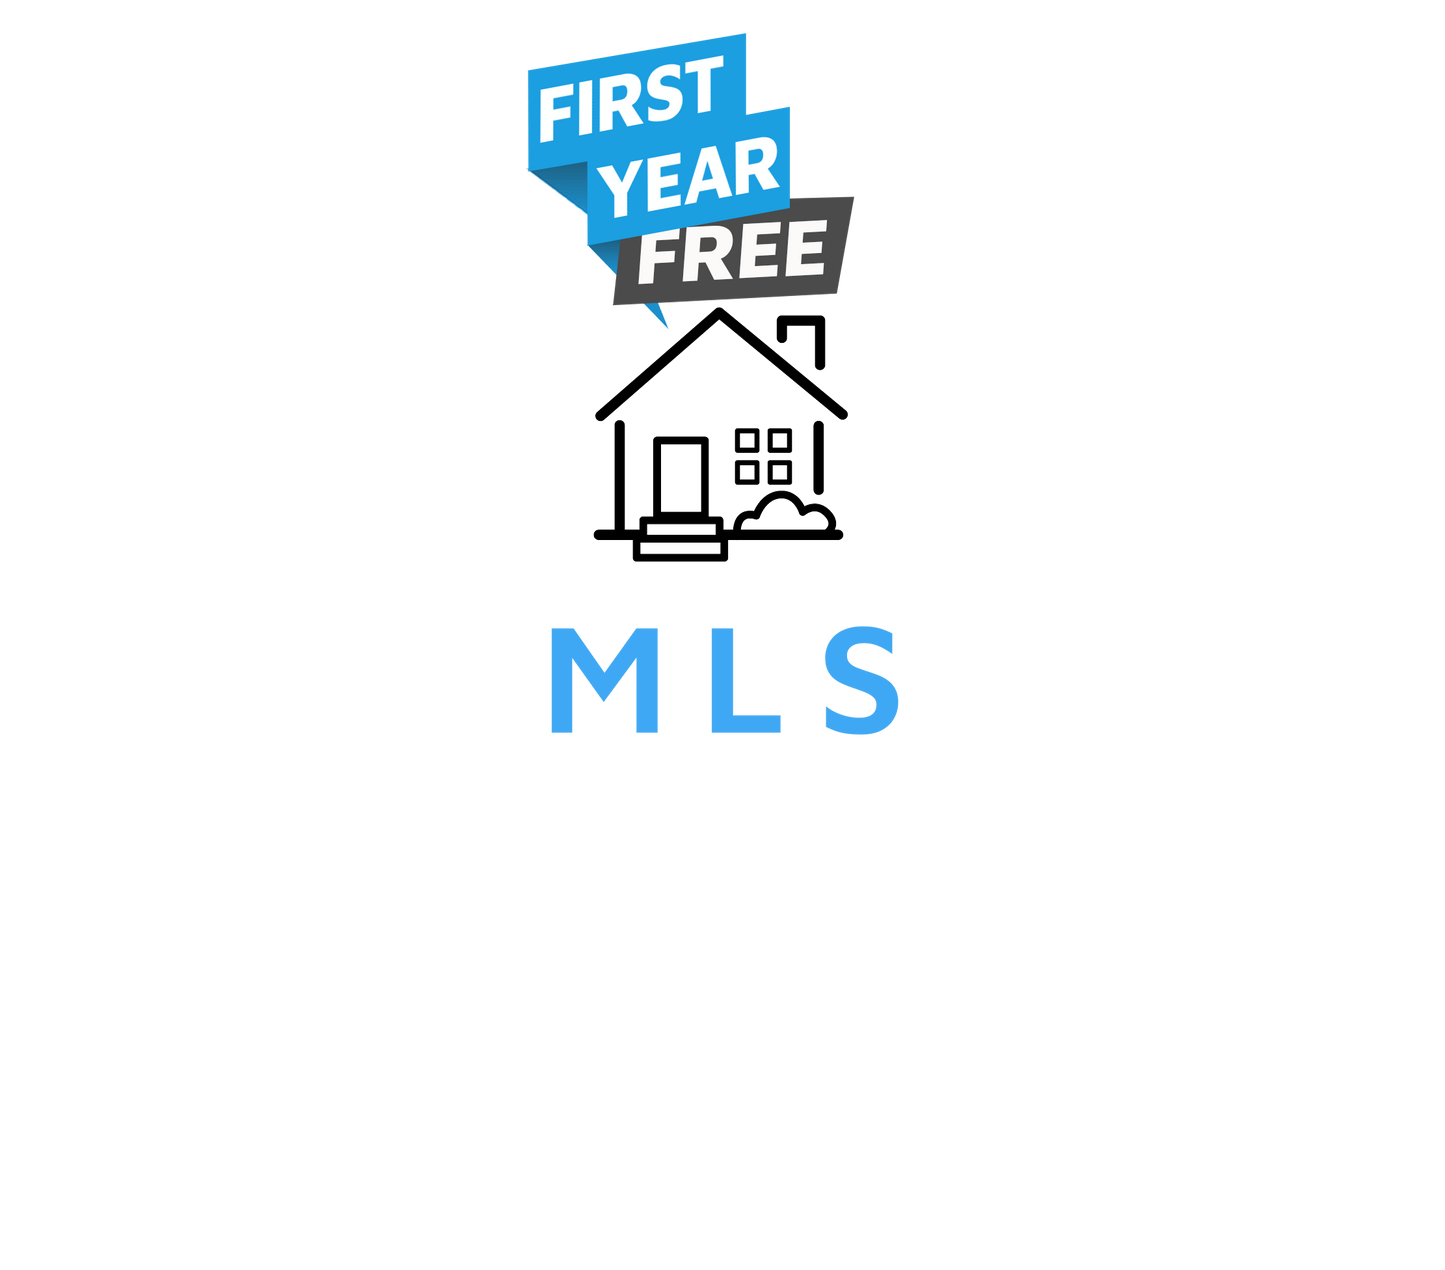 FIRST YEAR FREE - MLS - use code MLS29